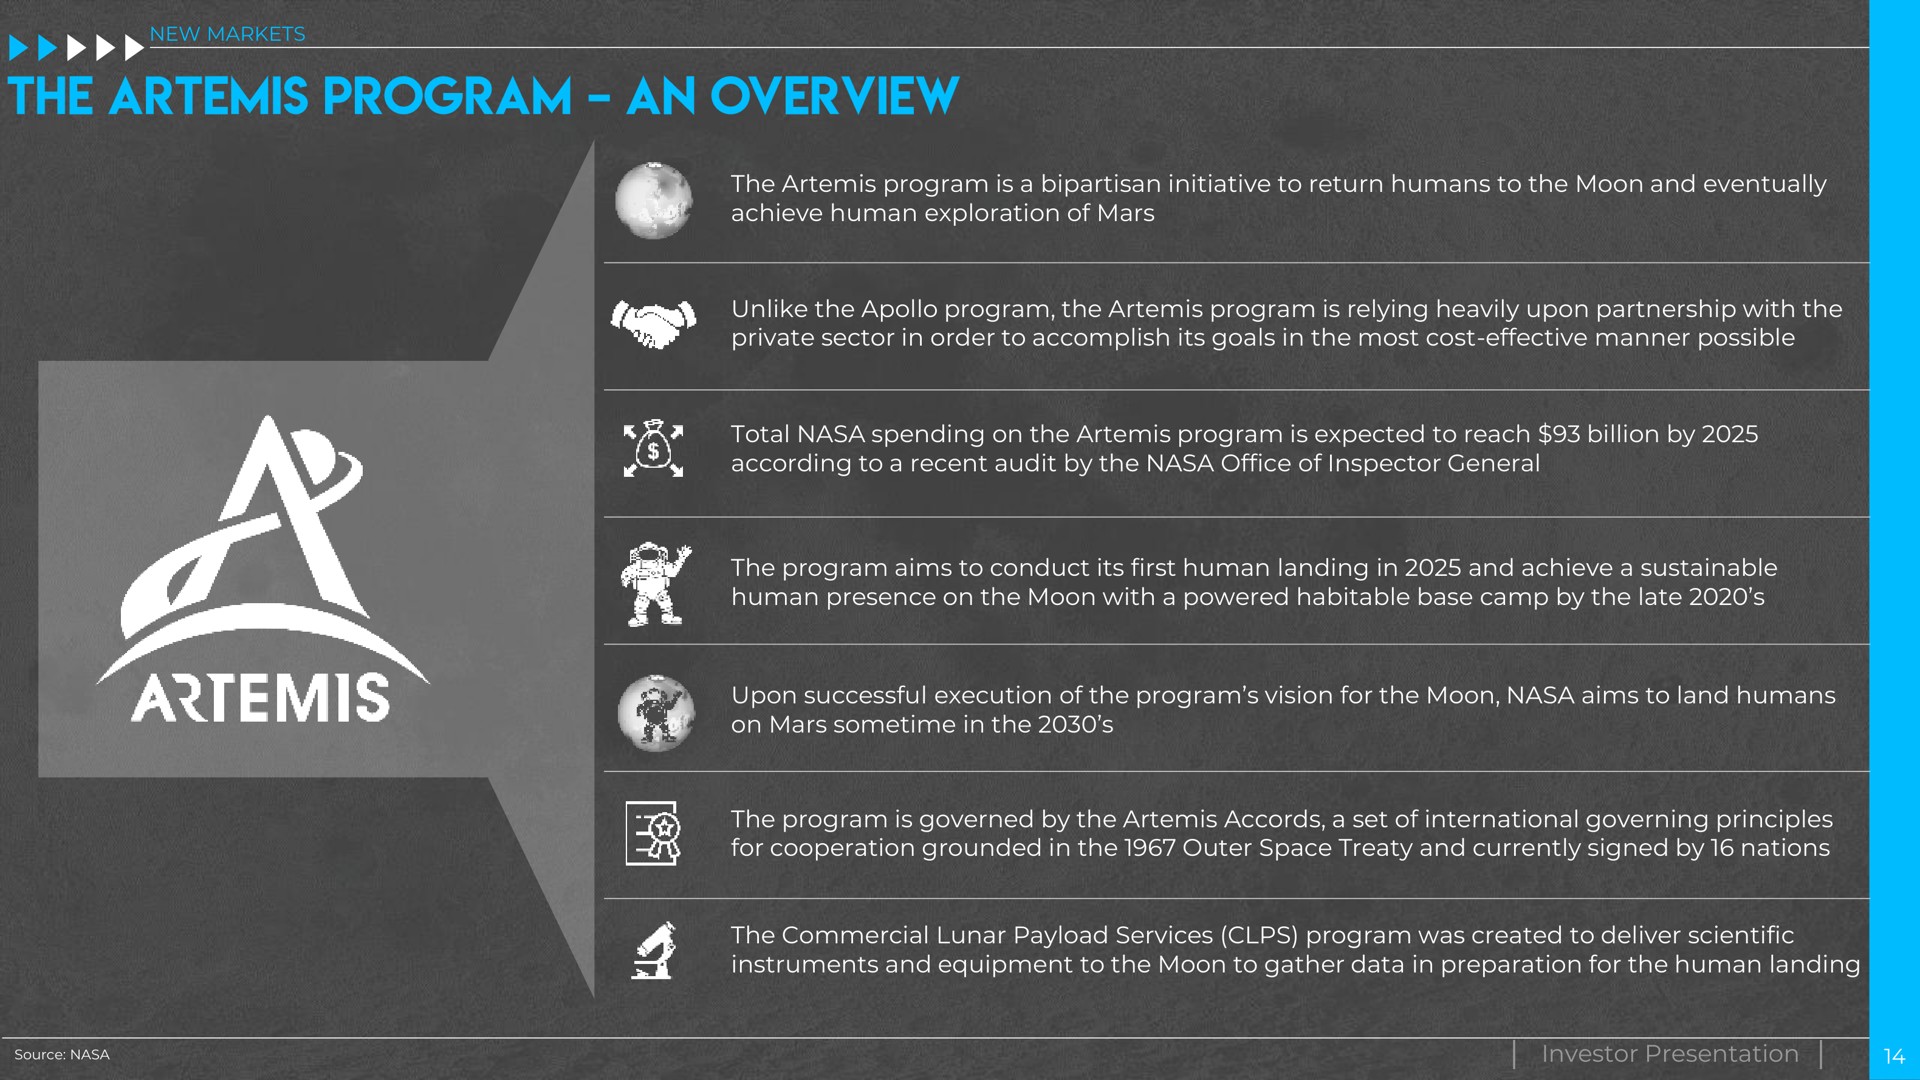 the program is a bipartisan initiative to return humans to the moon and eventually achieve human exploration of mars unlike the program the program is relying heavily upon partnership with the private sector in order to accomplish its goals in the most cost effective manner possible total spending on the program is expected to reach billion by according to a recent audit by the office of inspector general the program aims to conduct its first human landing in and achieve a sustainable human presence on the moon with a powered habitable base camp by the late upon successful execution of the program vision for the moon aims to land humans on mars sometime in the the program is governed by the accords a set of international governing principles for grounded in the outer space treaty and currently signed by nations the commercial lunar services program was created to deliver scientific instruments and equipment to the moon to gather data in preparation for the human landing investor presentation | Intuitive Machines